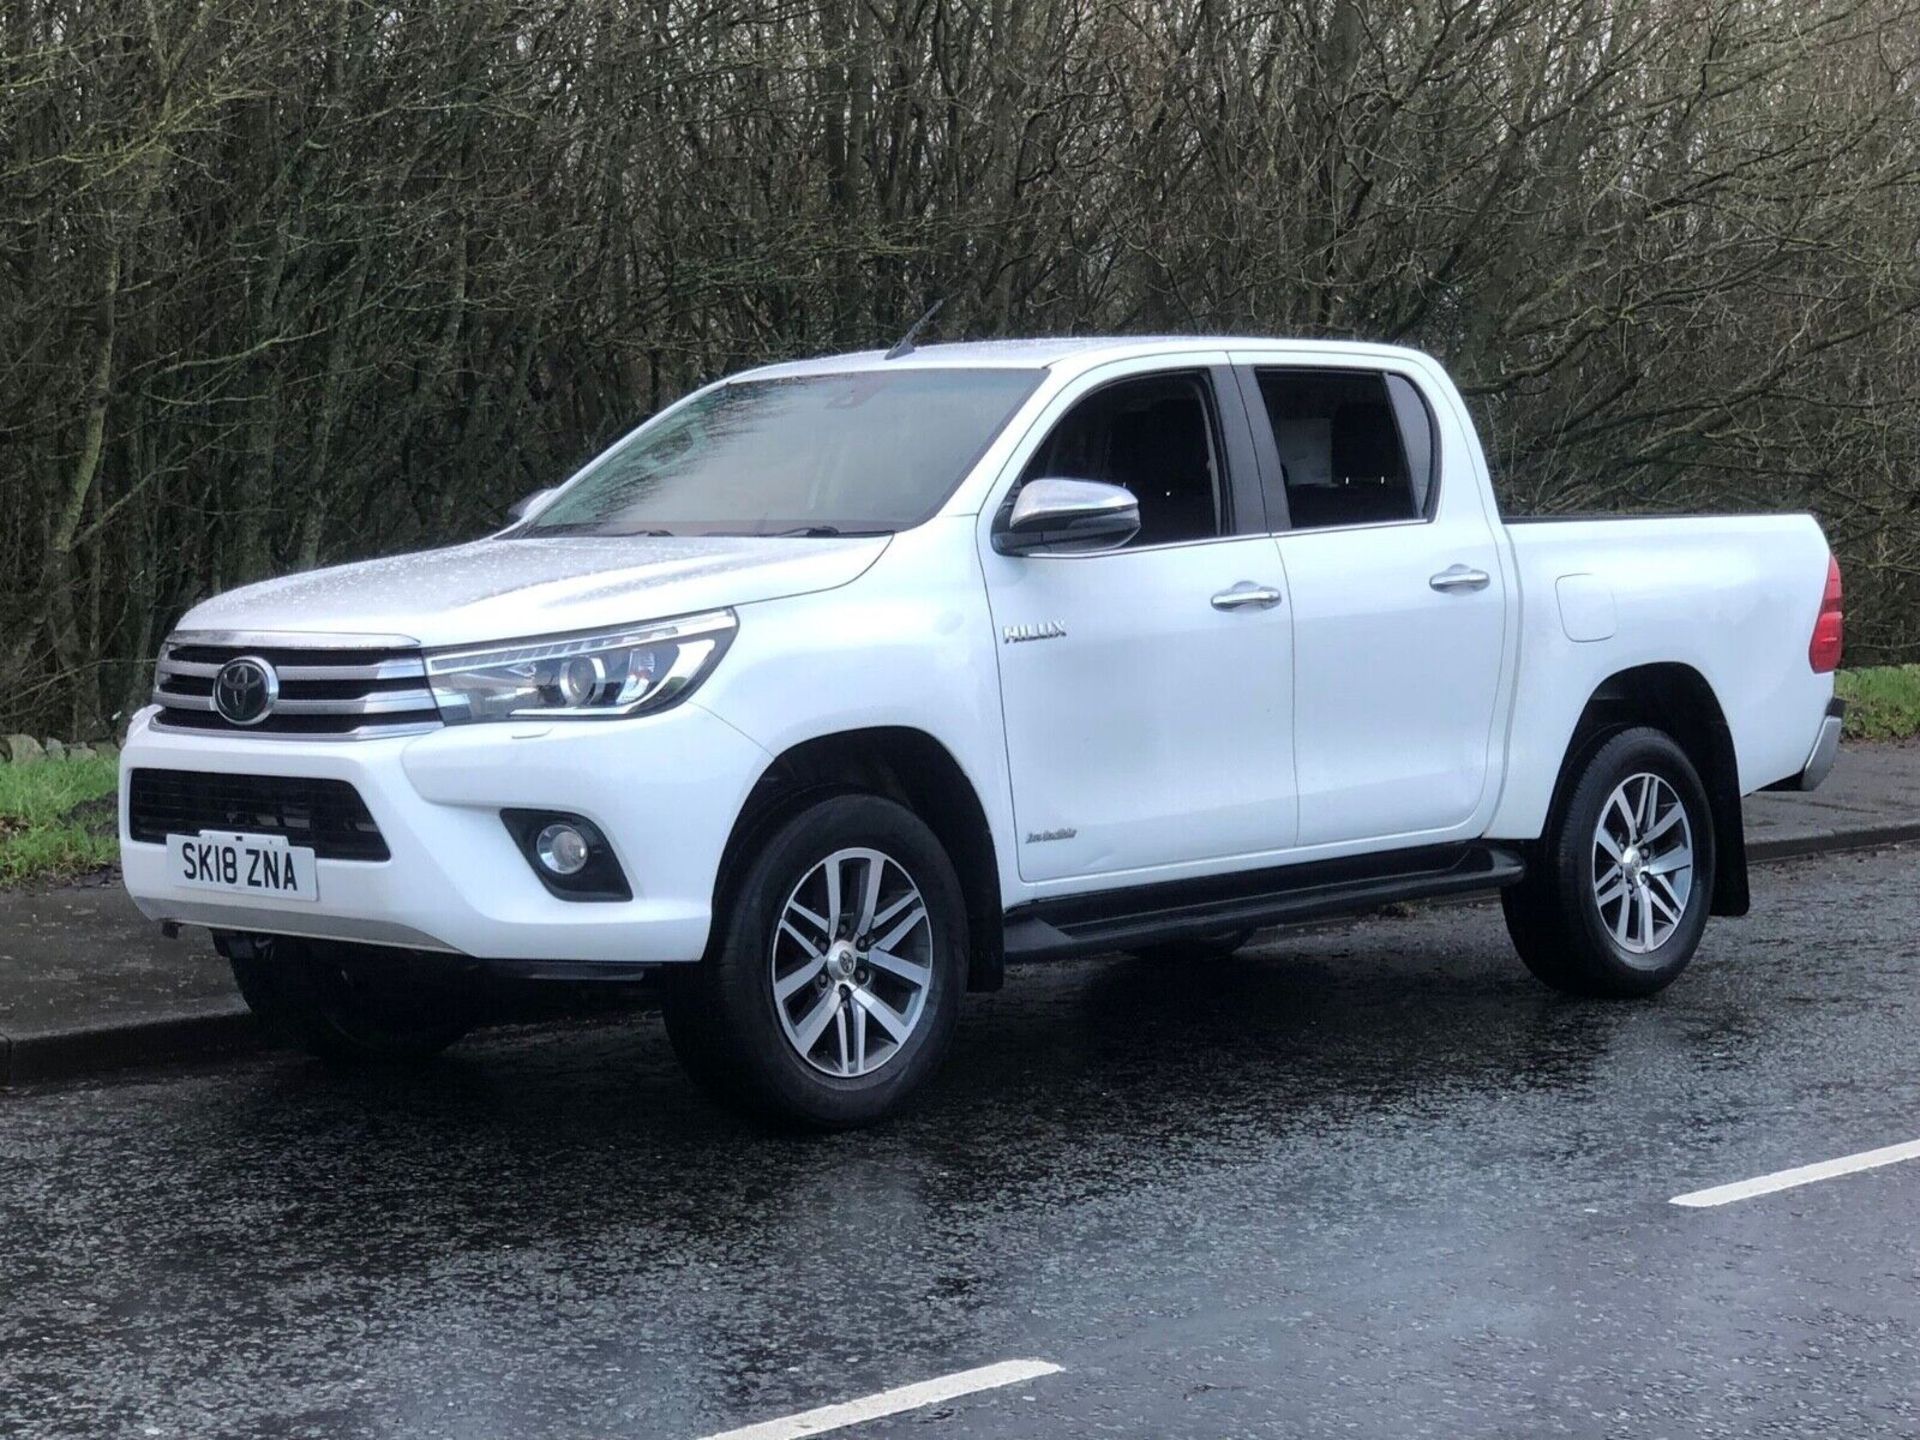 2018/18 TOYOTA HILUX 2.4 INVINCIBLE DOUBLE CAB - OFF-ROAD ADVENTURE READY>>--NO VAT ON HAMMER--<< - Image 14 of 14